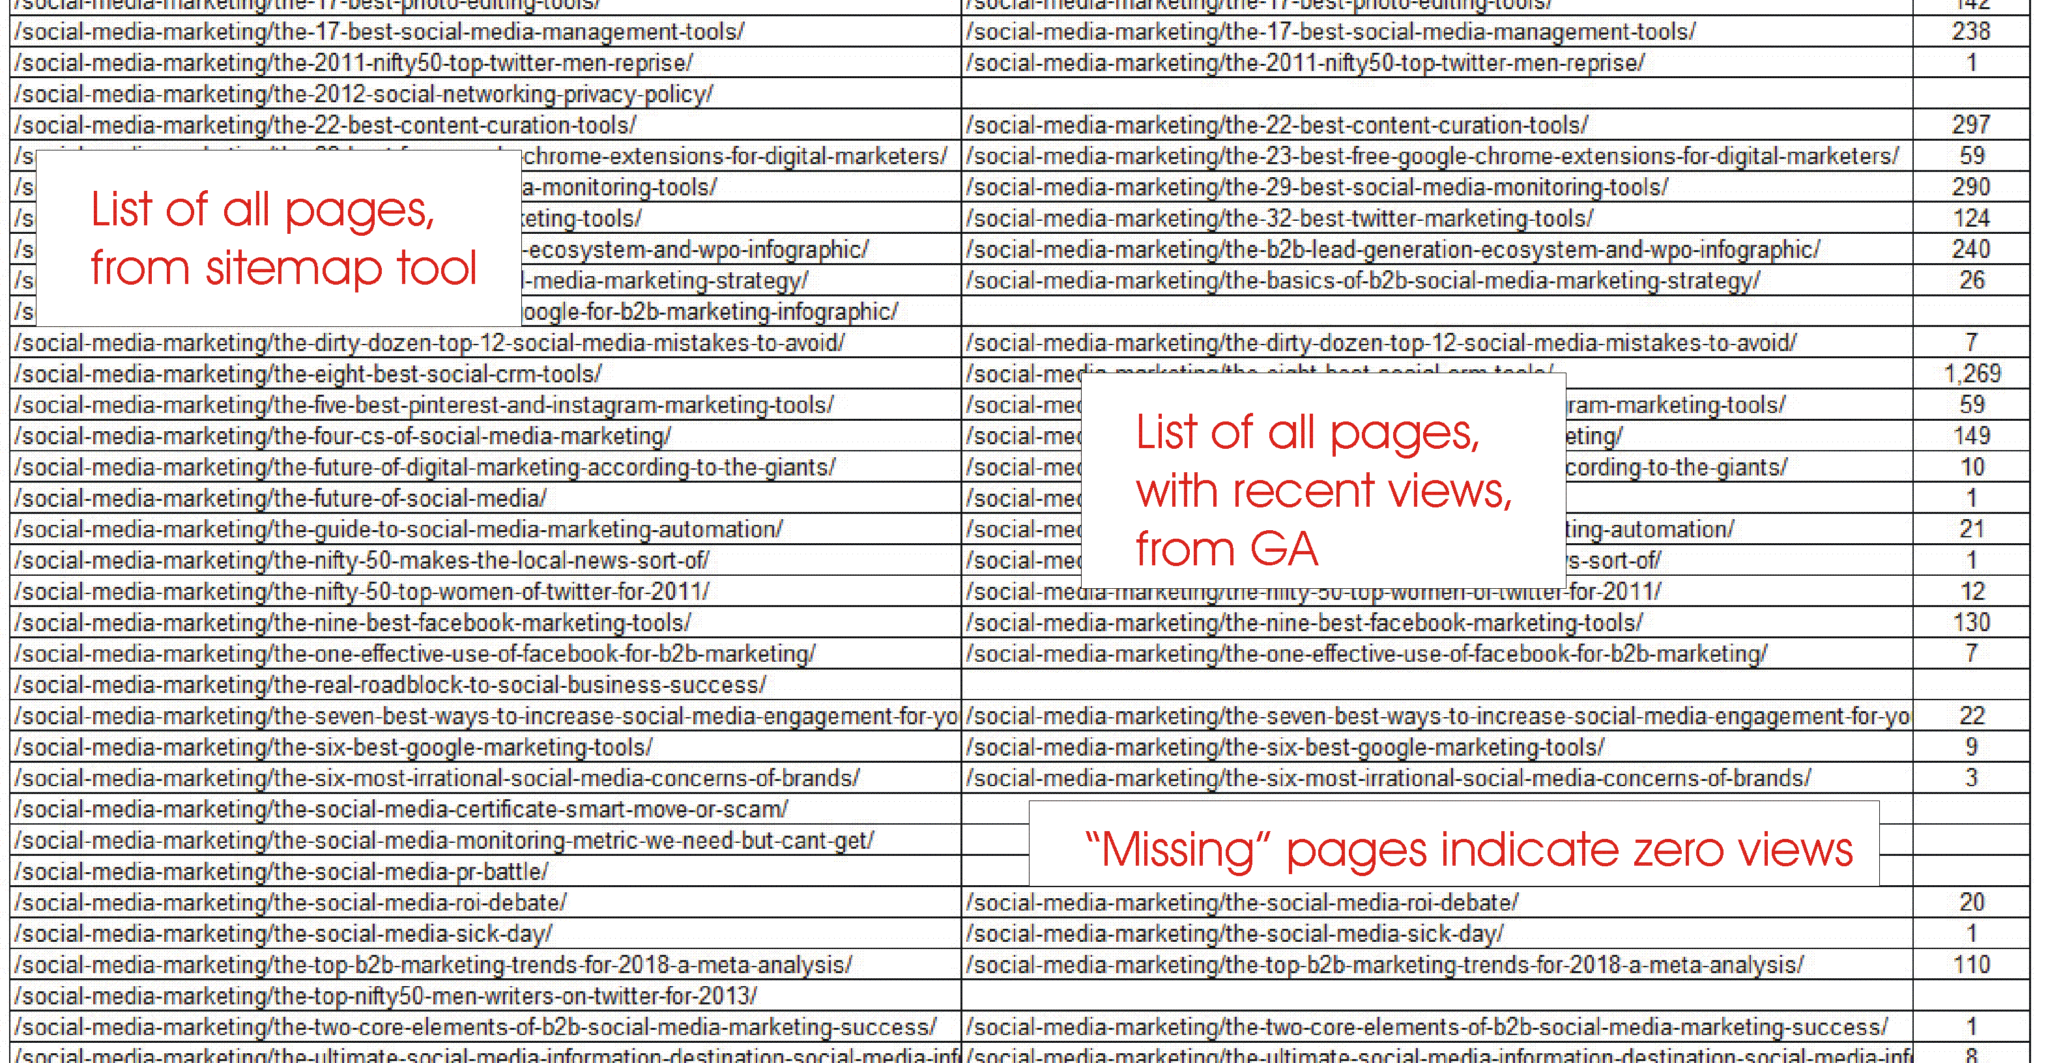 Teach your old blog new SEO tricks - Compare all pages